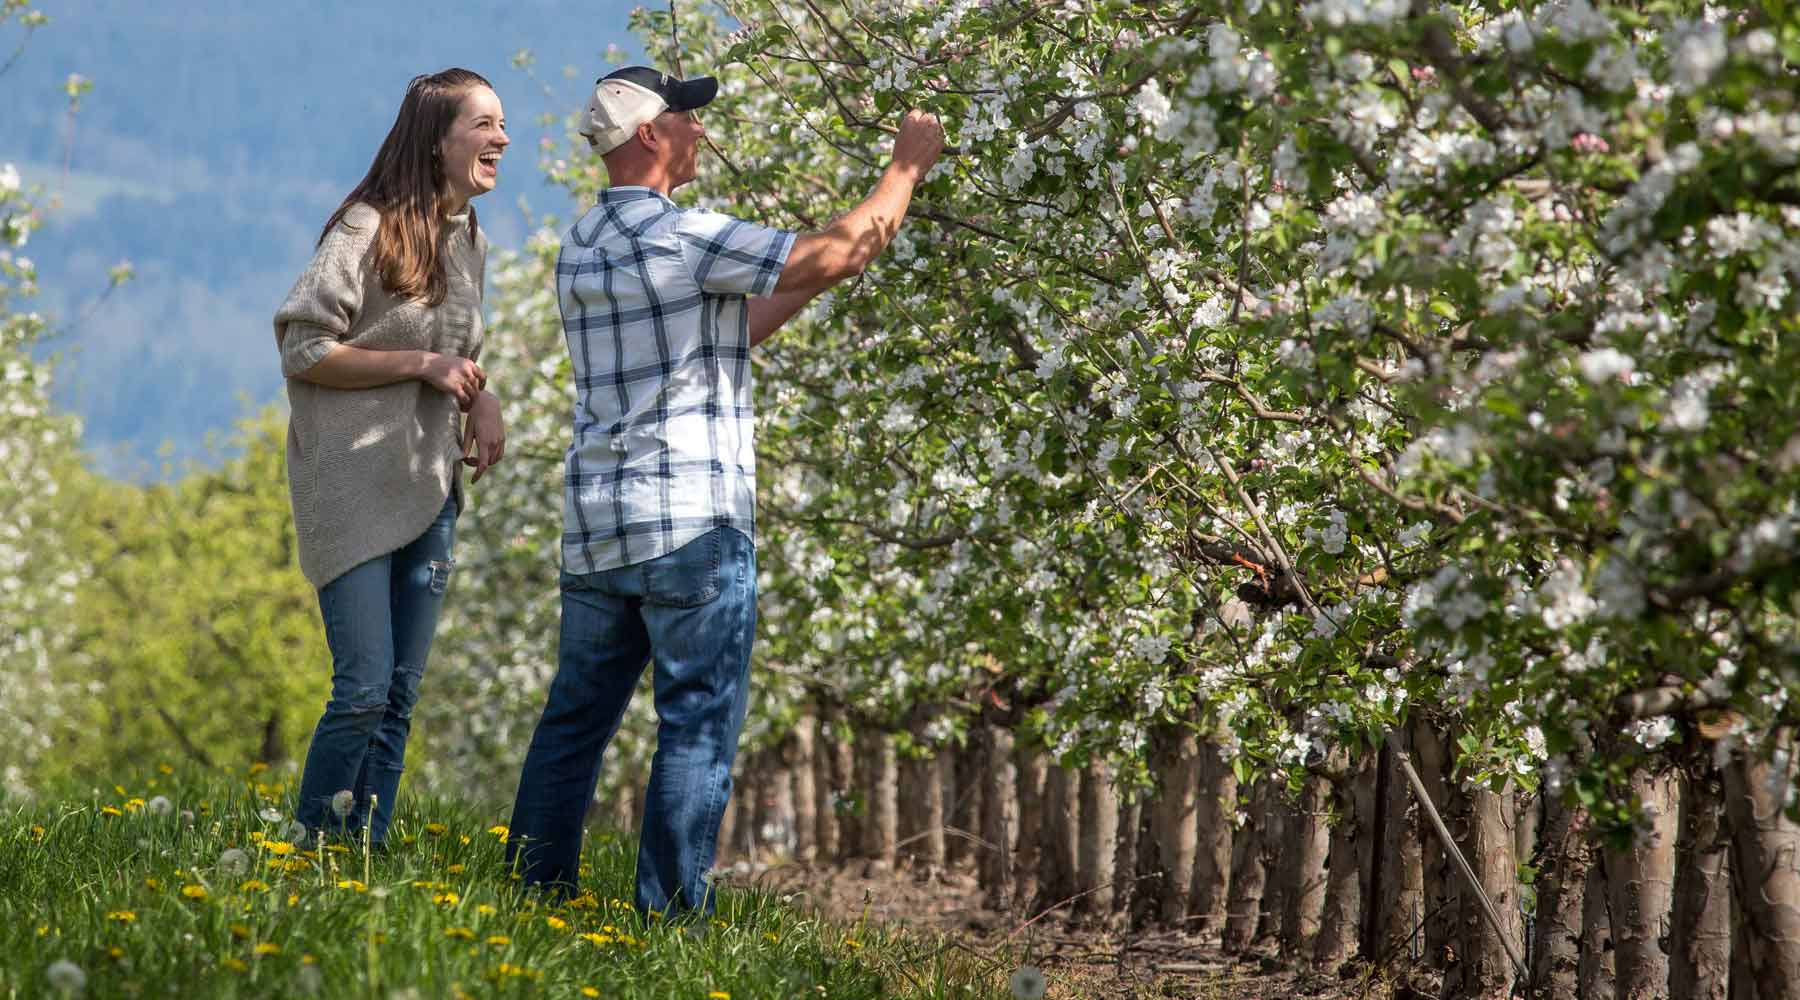 Dave Gee, Oregon Growers founder, with a staff member inspecting an orchard for NON GMO compliance.